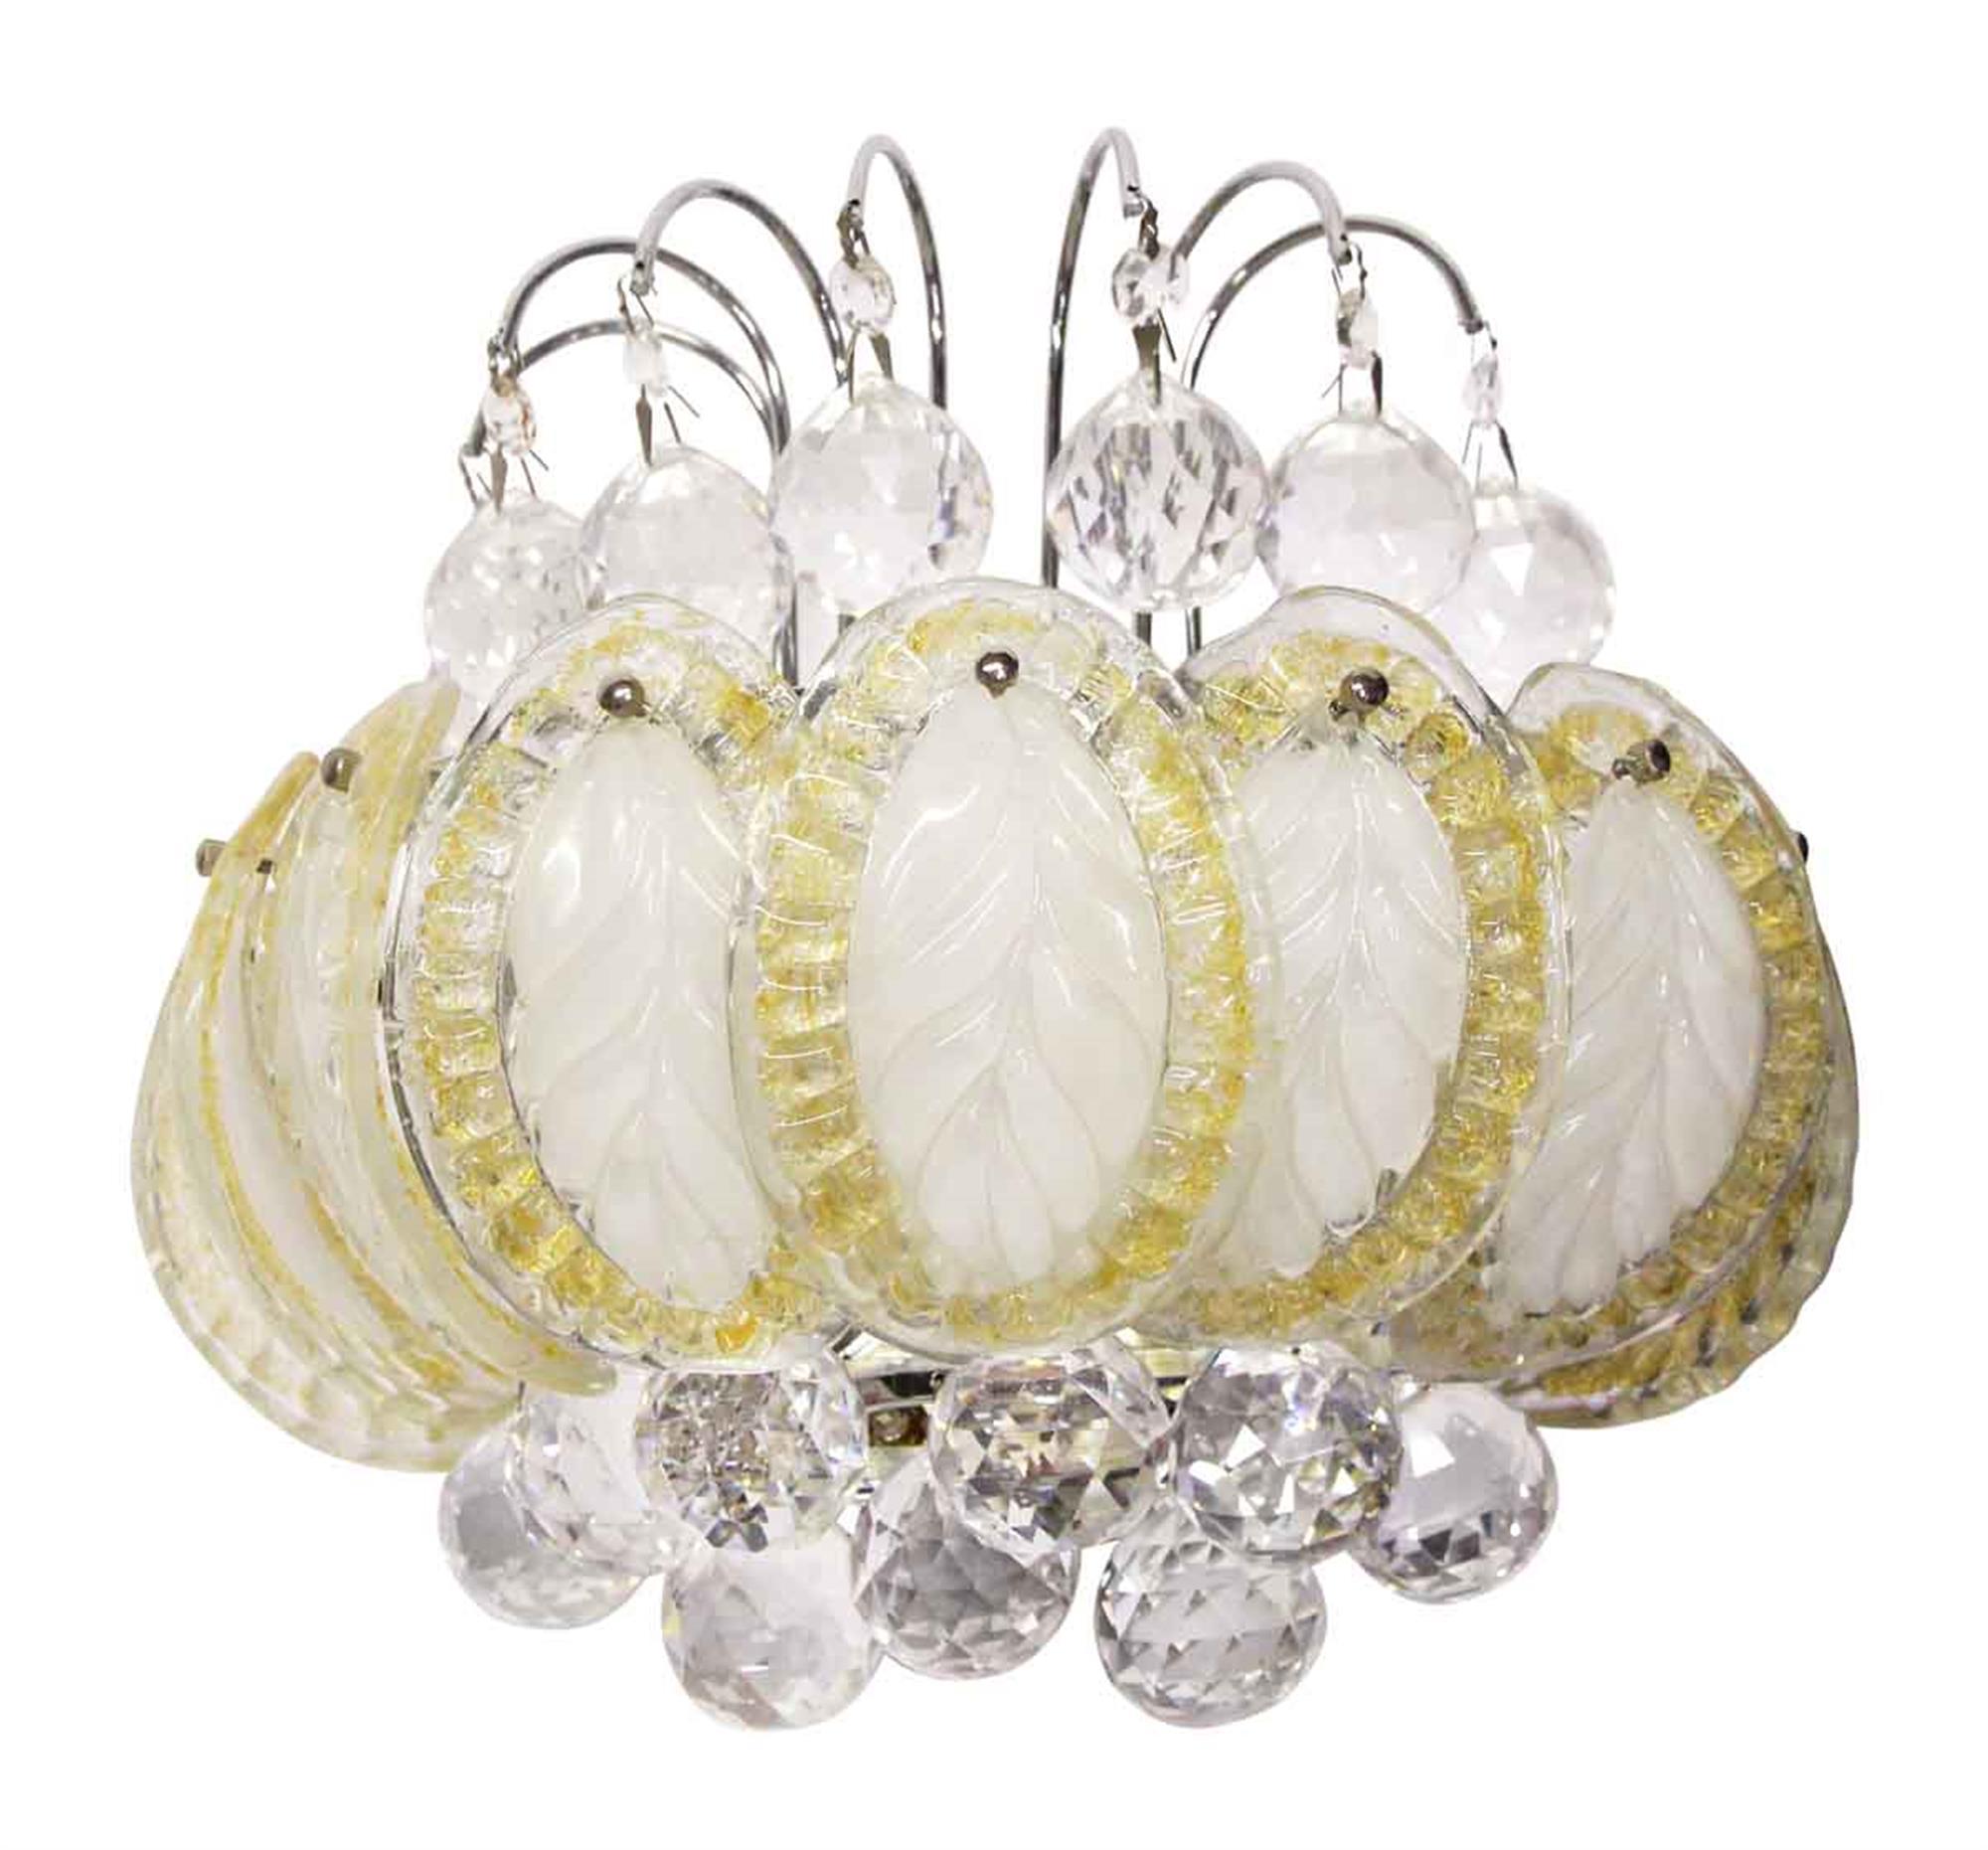 1980s glass leaves and faceted crystal sconce. Matching chandeliers available. Requires three bulbs. Please allow two weeks for rewiring and cleaning. Several available at time of posting. Priced individually. This can be seen at our 302 Bowery